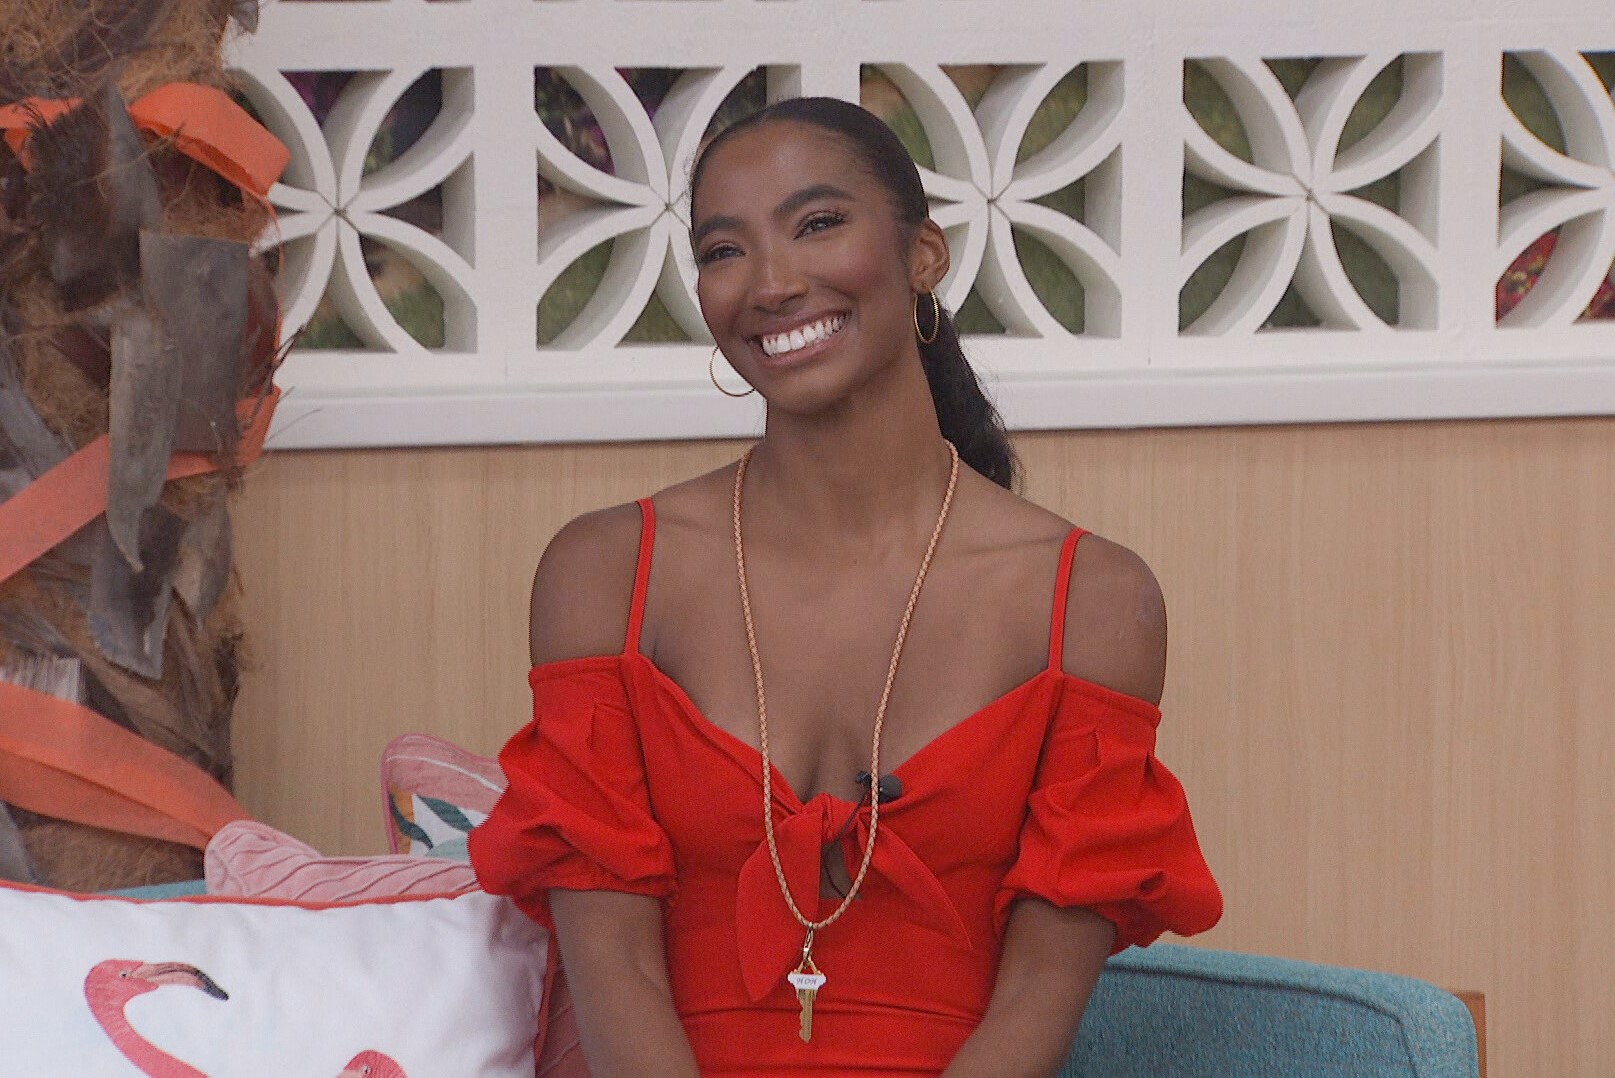 Taylor Hale, who could win 'Big Brother 24' on CBS, wears a red dress and the HOH key around her neck.